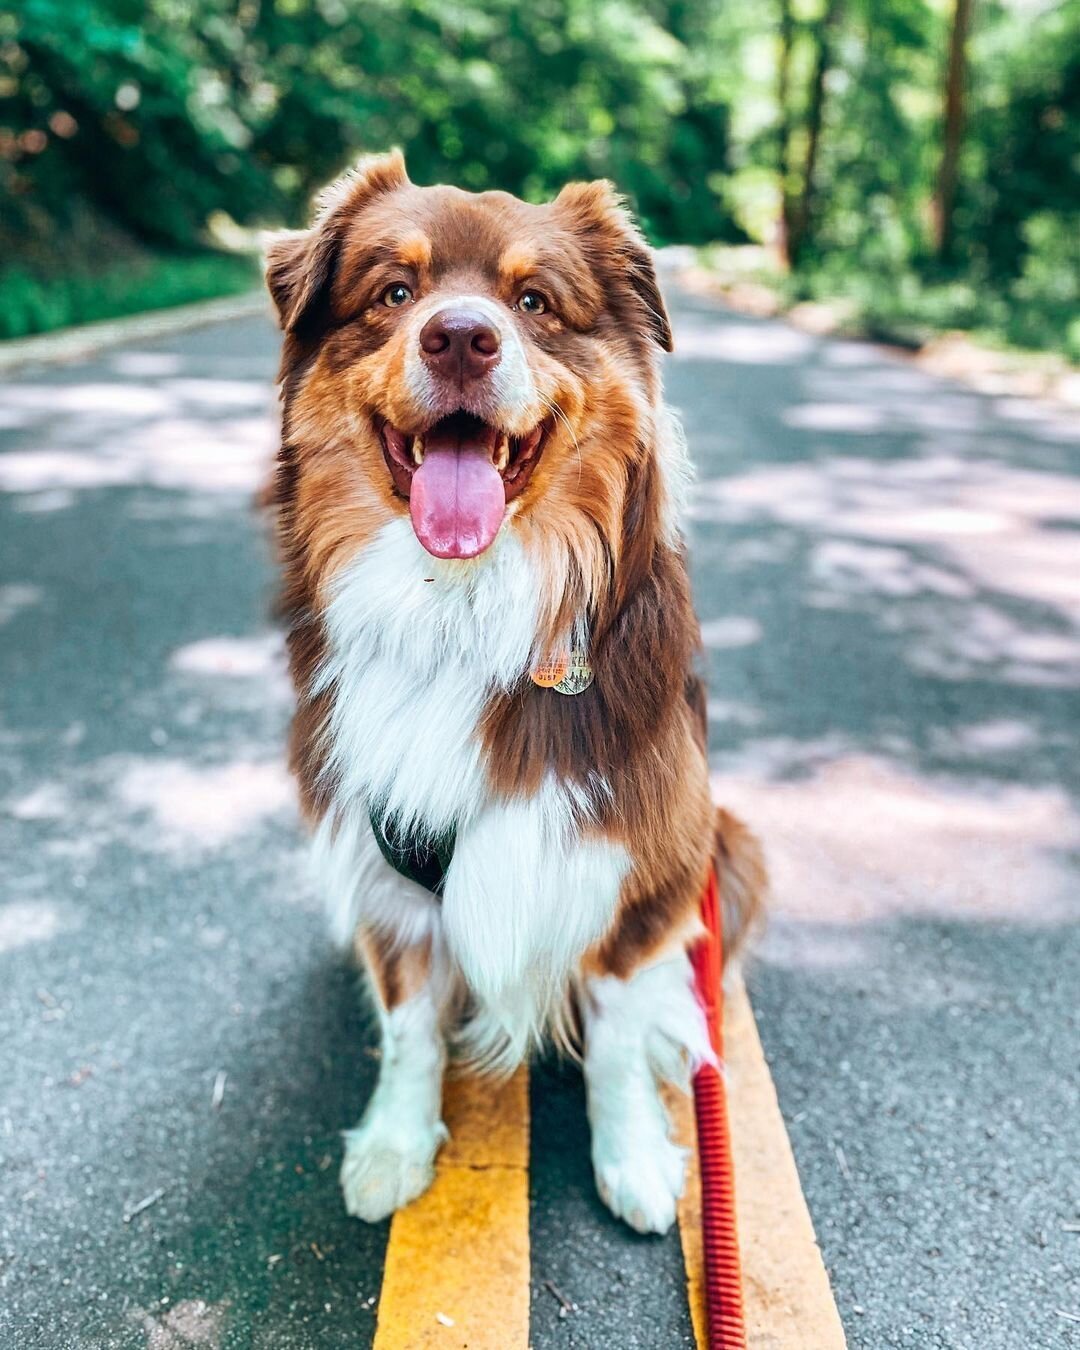 Only the cutest, goodest dogs pose for photos on their leashes in #RockCreekPark! When you&rsquo;re out on walks with your furry friends, please remember that it is prohibited to let dogs off leash within the park - this is to protect them, you, wild